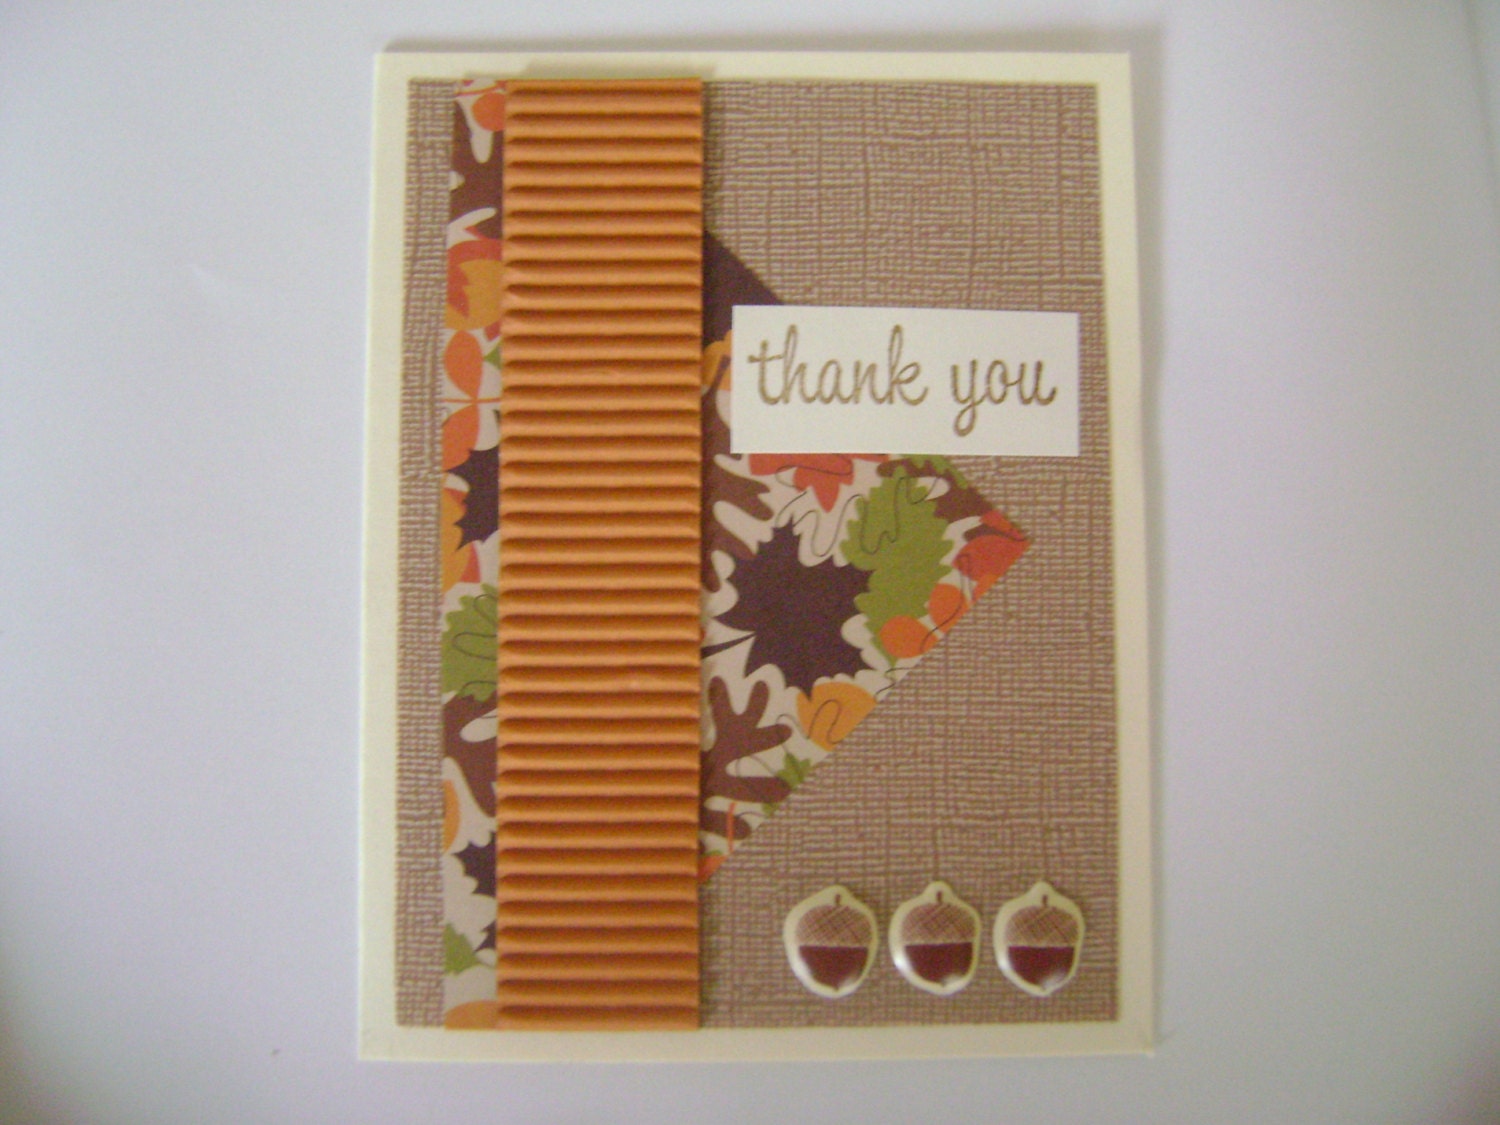 Handmade Card - Autumn Fall Leaves Brown Orange Stamped Thank You Card with Acorns - Sammark